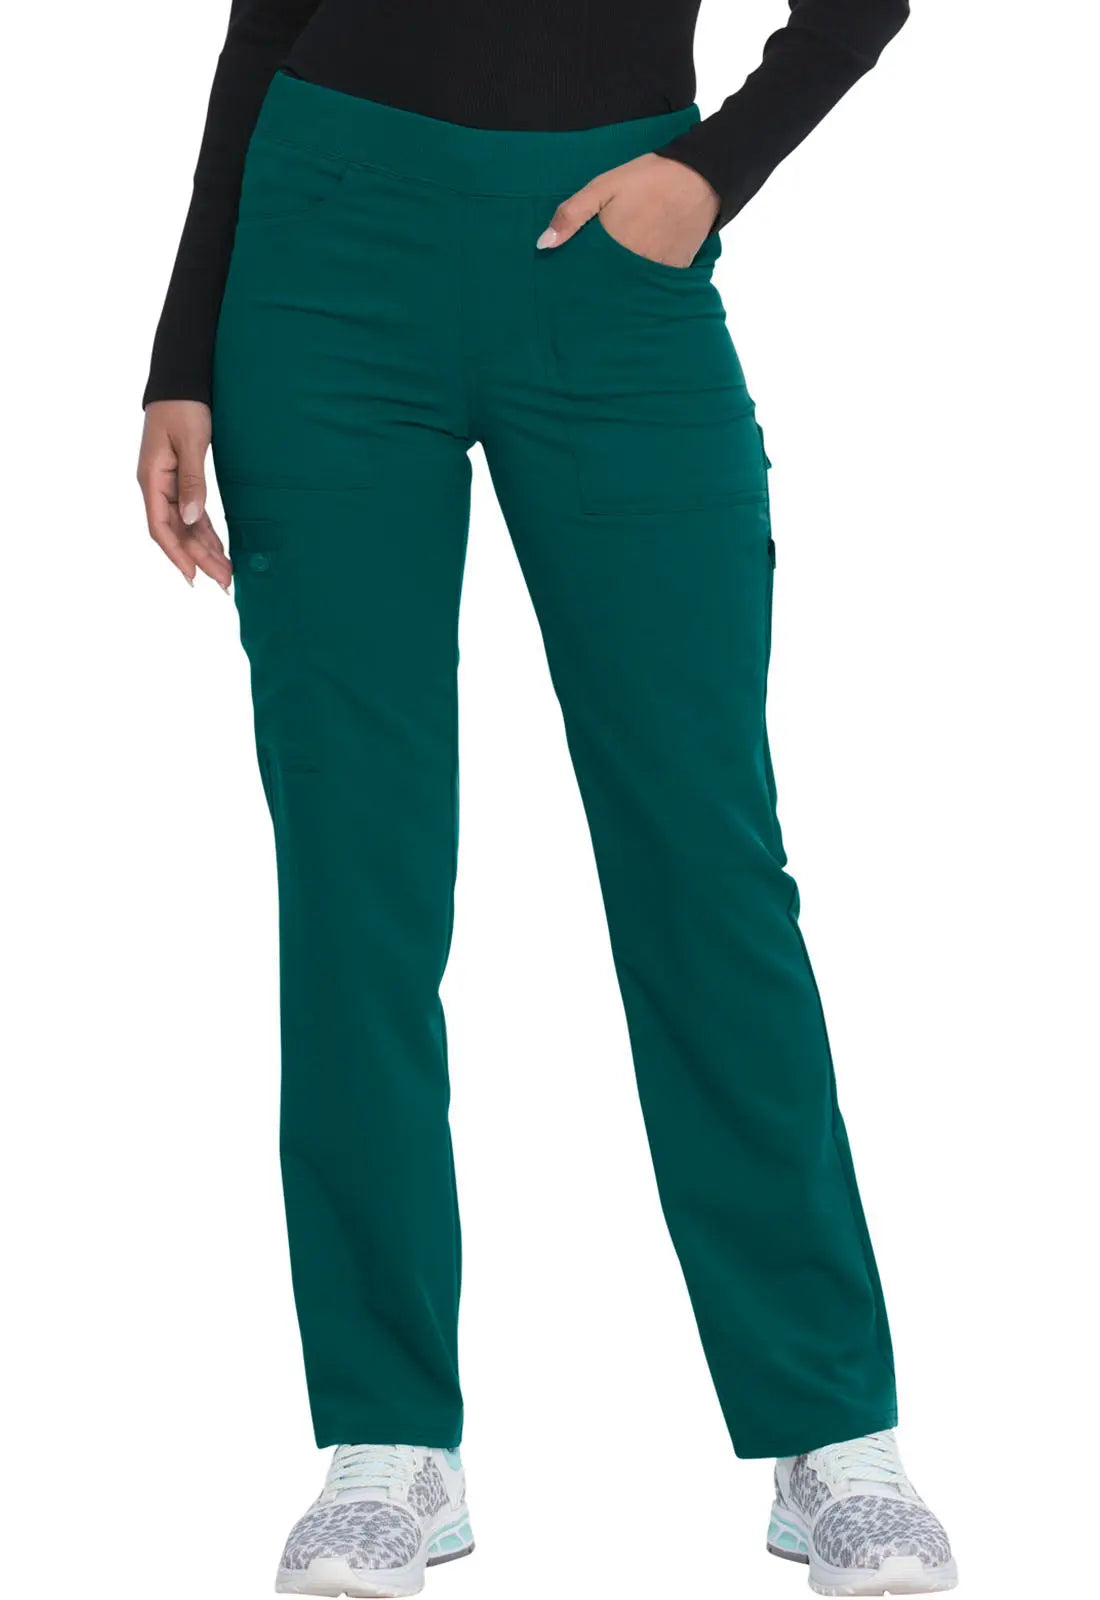 Women’s Fitted Tapered Leg Scrub Pant